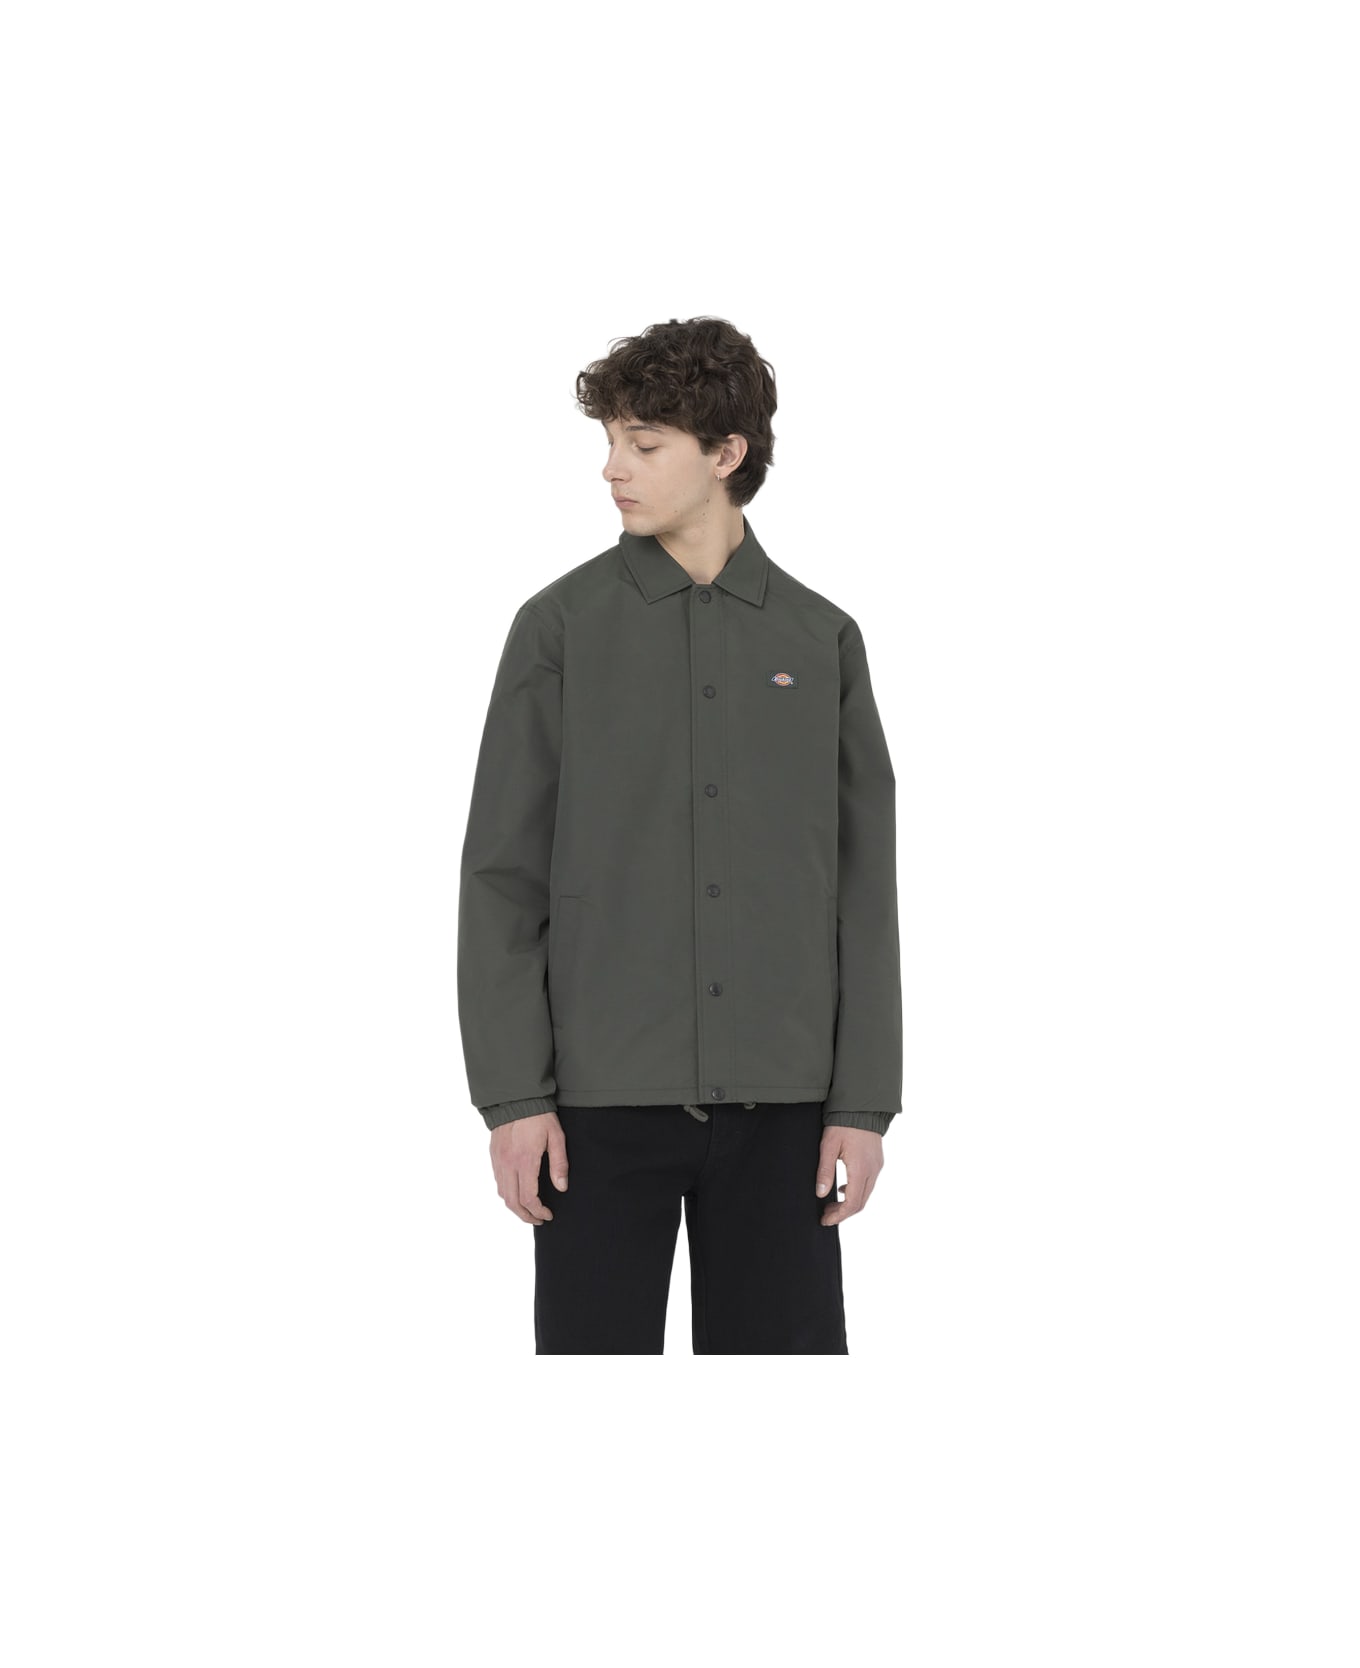 Dickies Oakport Coach - Olive Green ジャケット